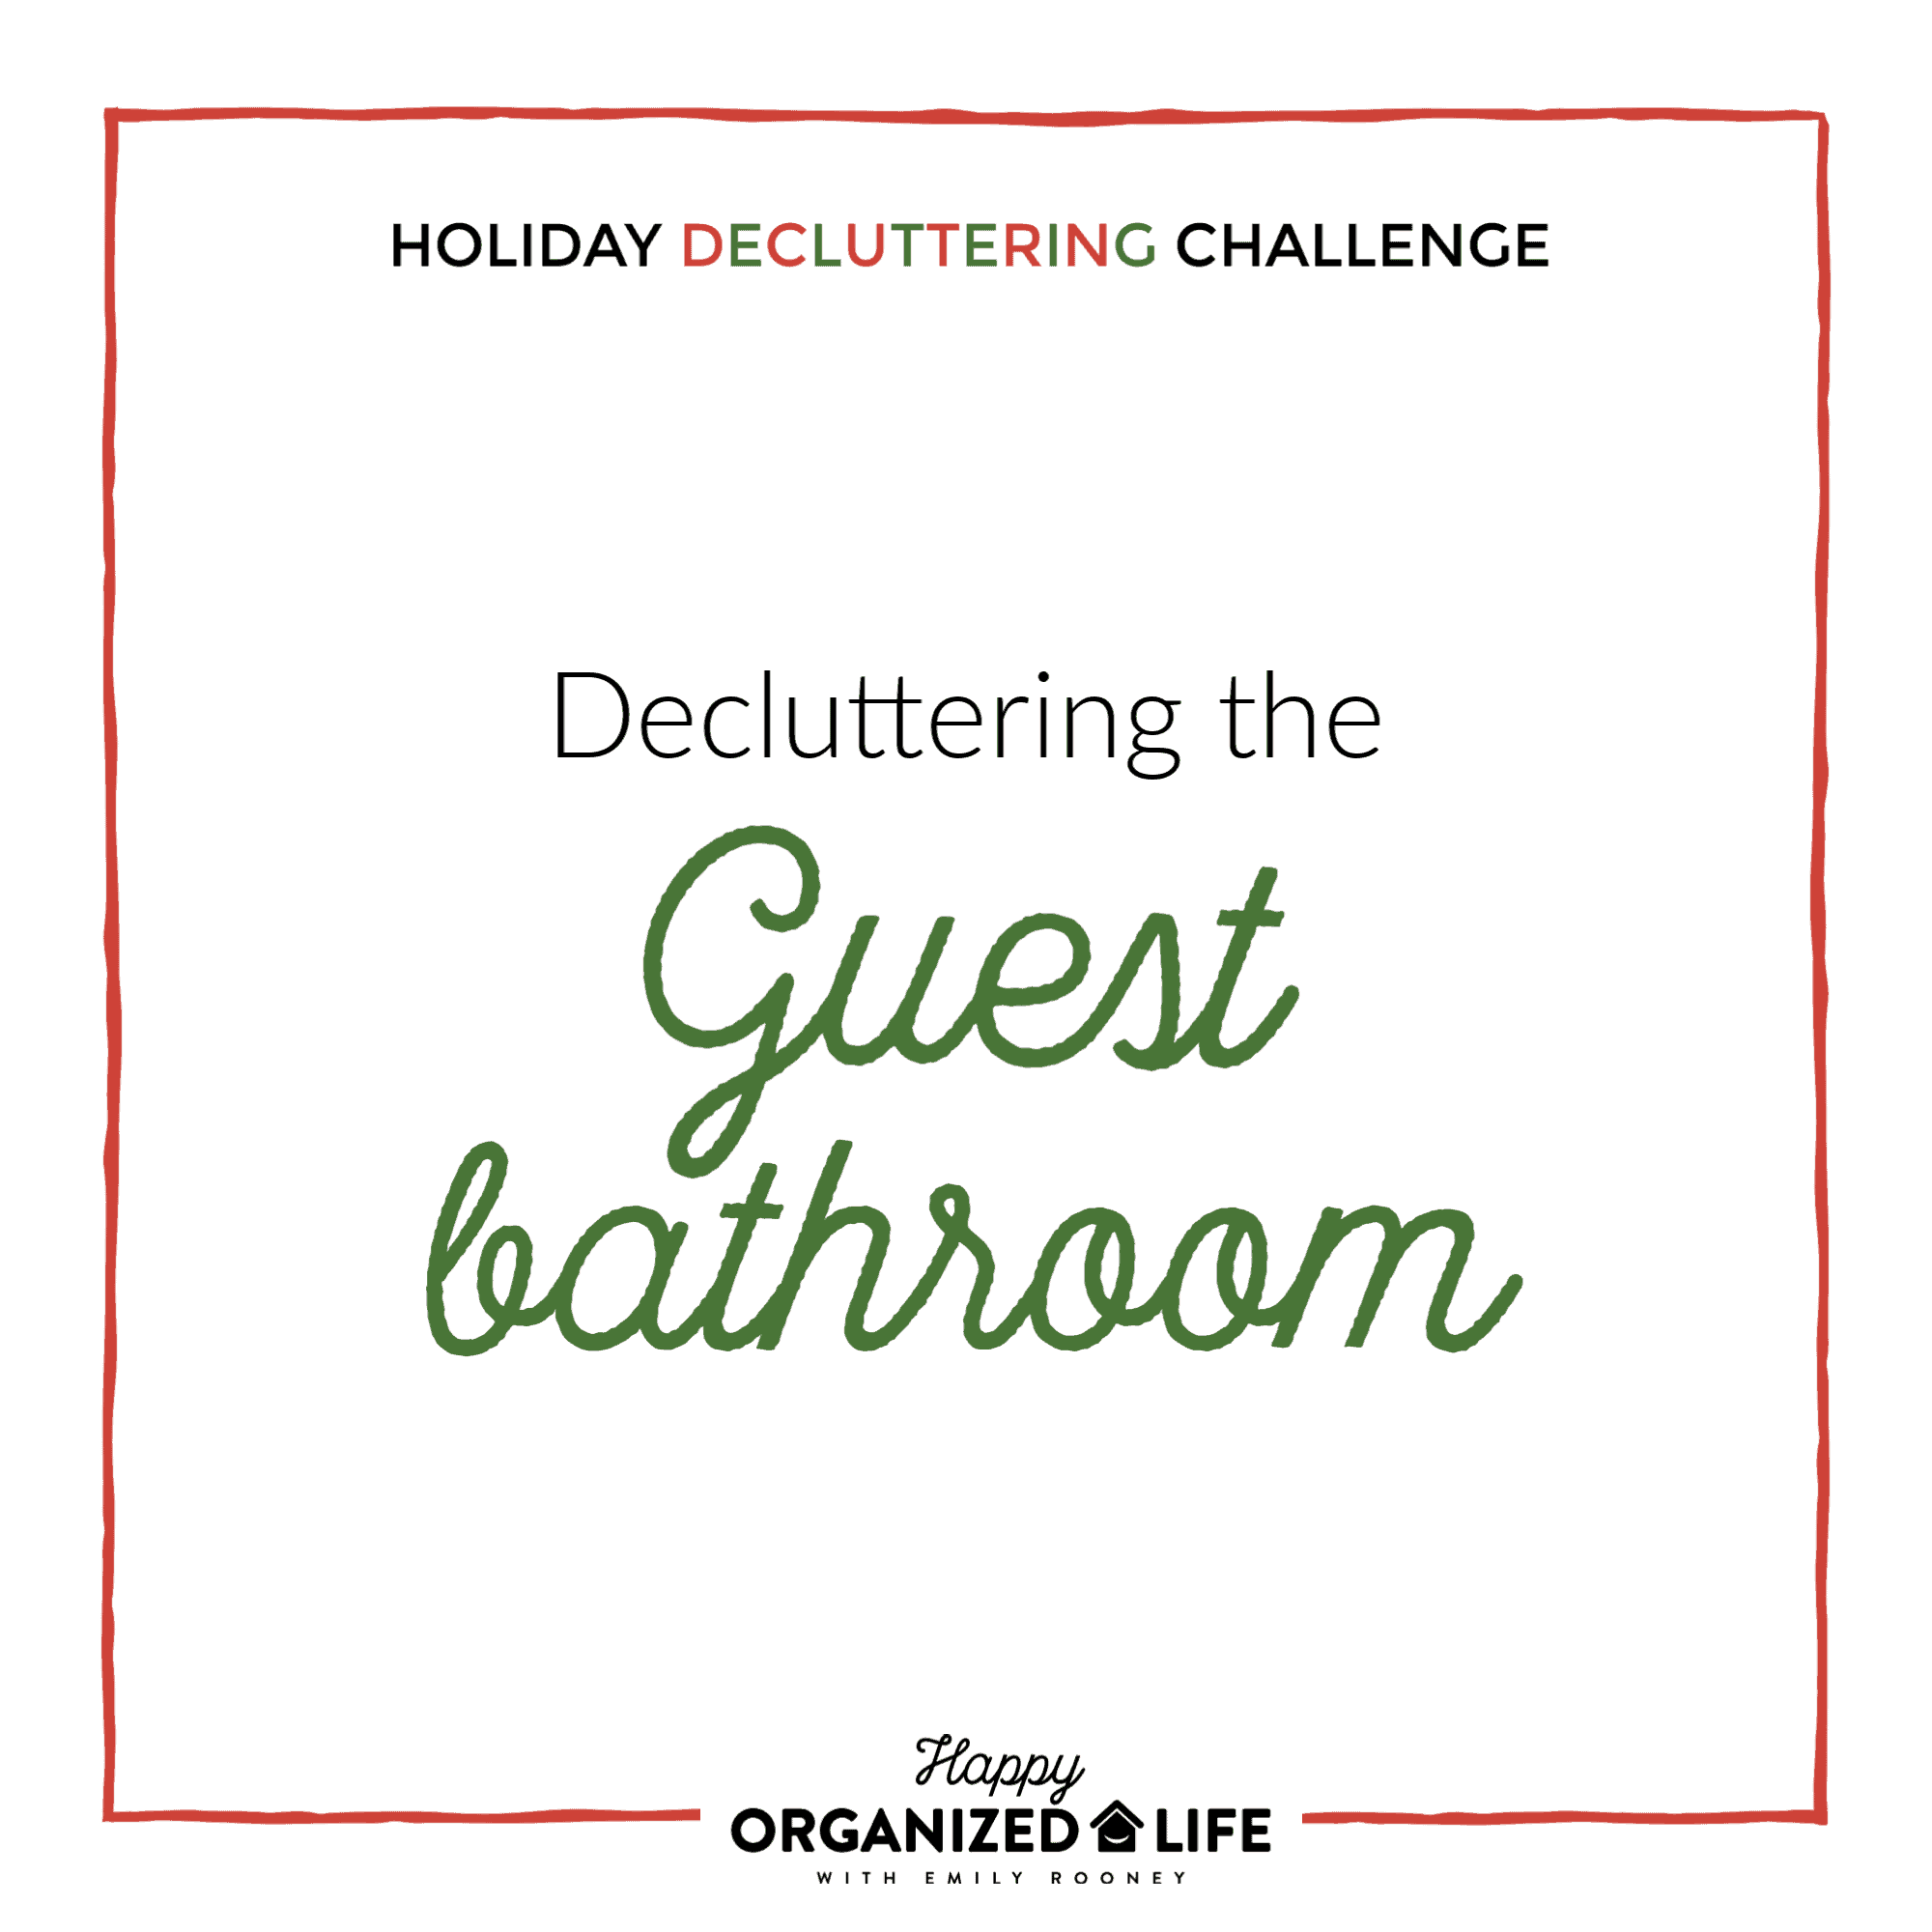 One of the most important spaces to clean and organize for guests in the bathroom. No one wants to use a gross or cluttered restroom, especially in someone else's home! Here are a few questions to ask about your guest bathroom before hosting guests.